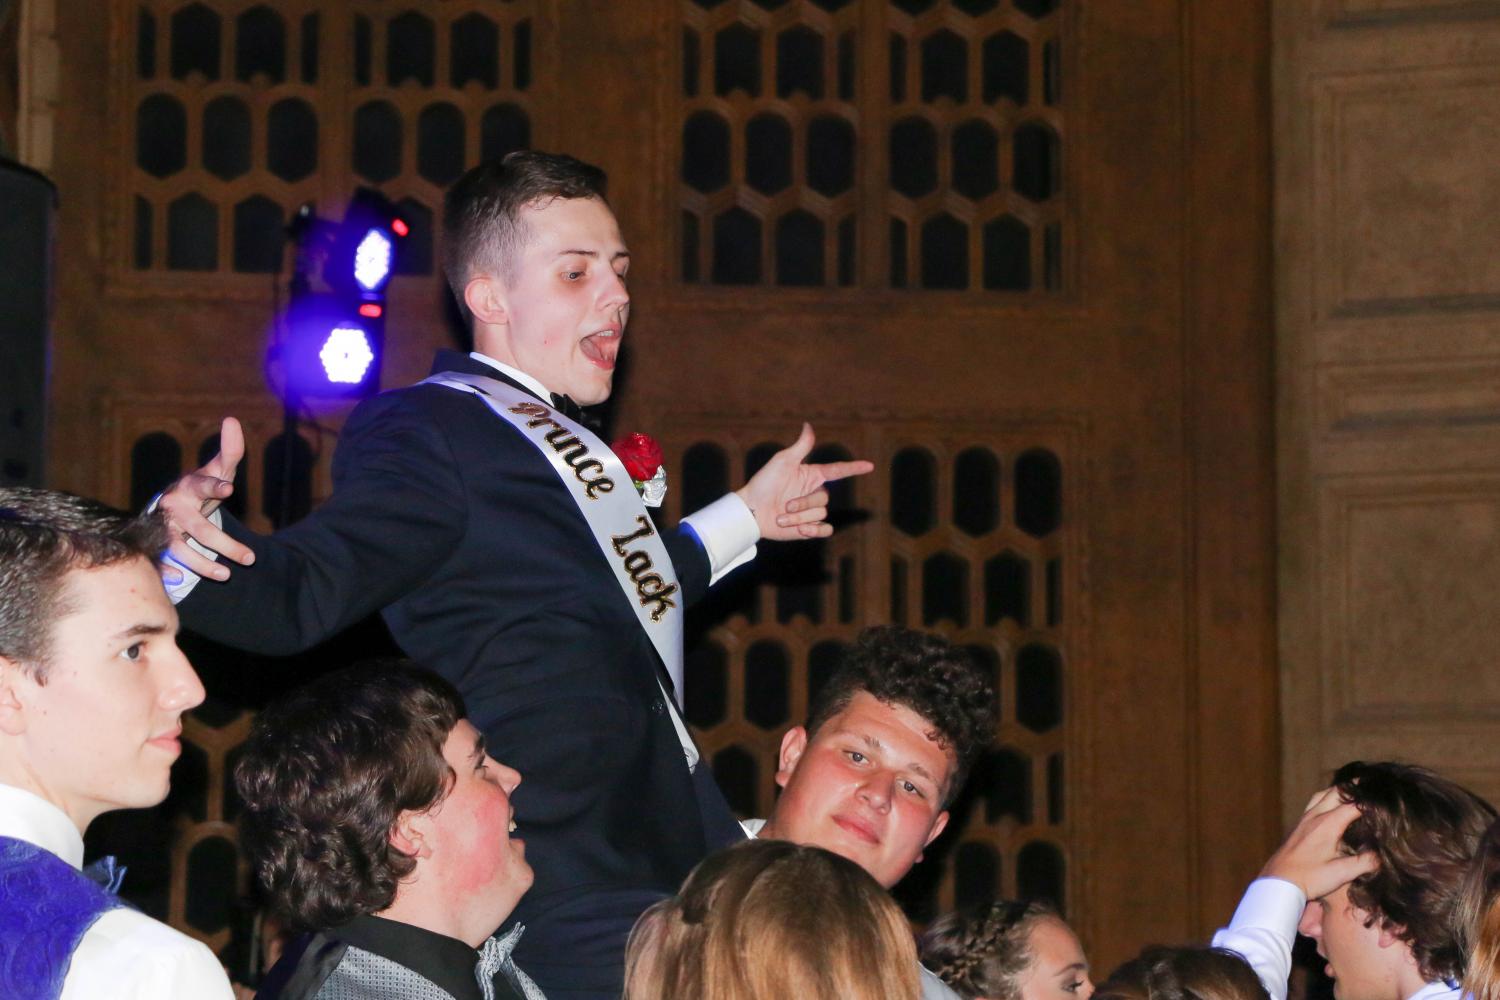 Last years prom king, Zack Dean, being lifted by the crowd at prom.